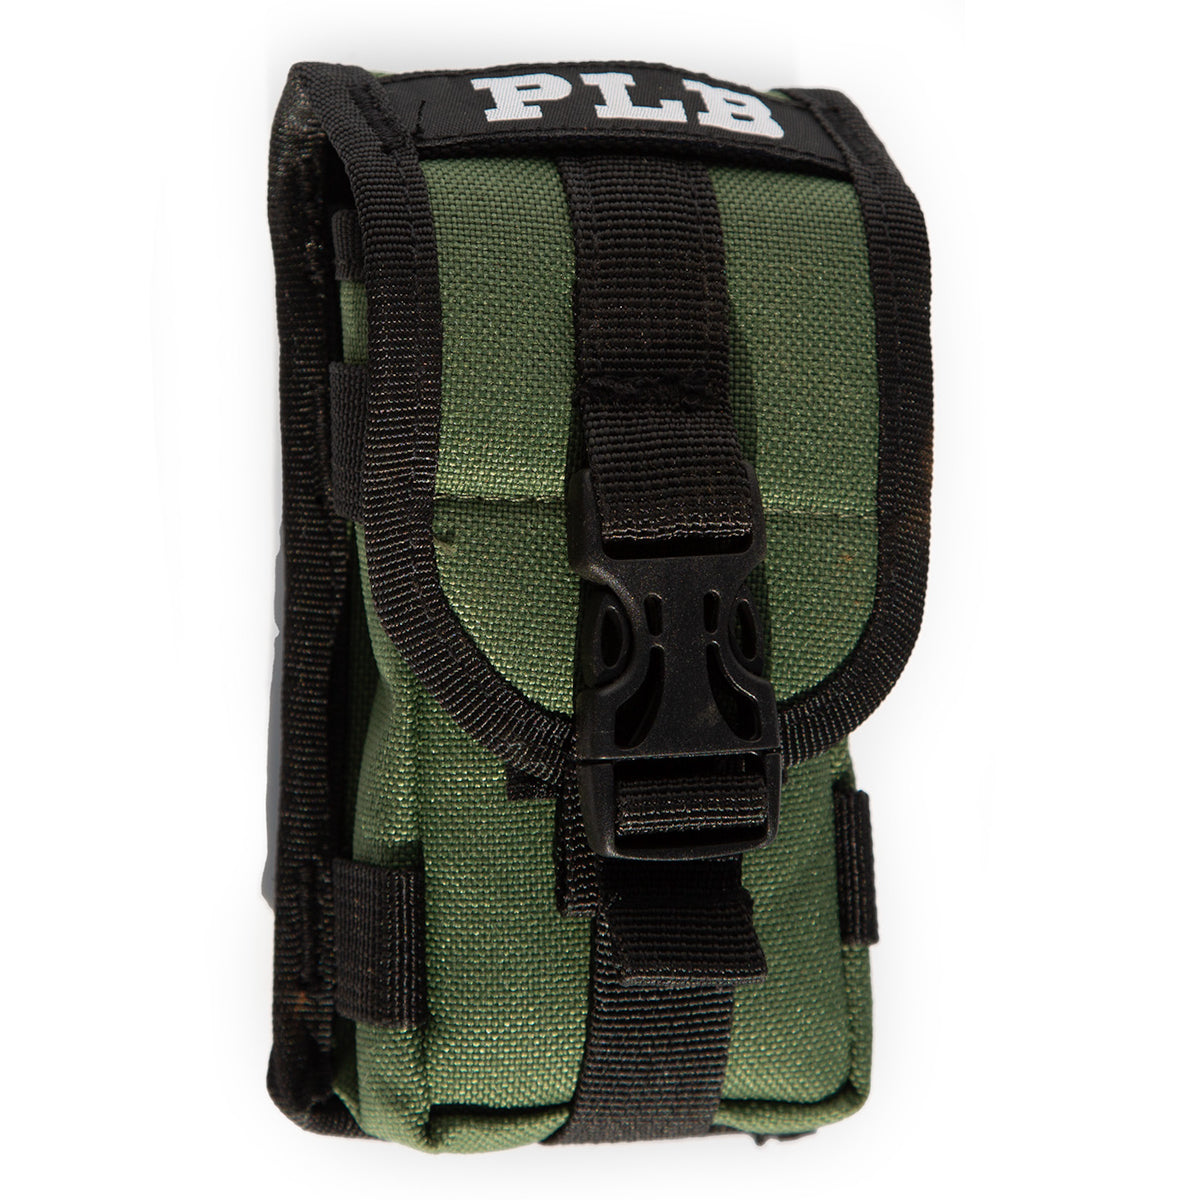 Heavy-Duty PLB Flotation Pouch: Secure & Stylish Protection for ACR Personal Locator Beacons